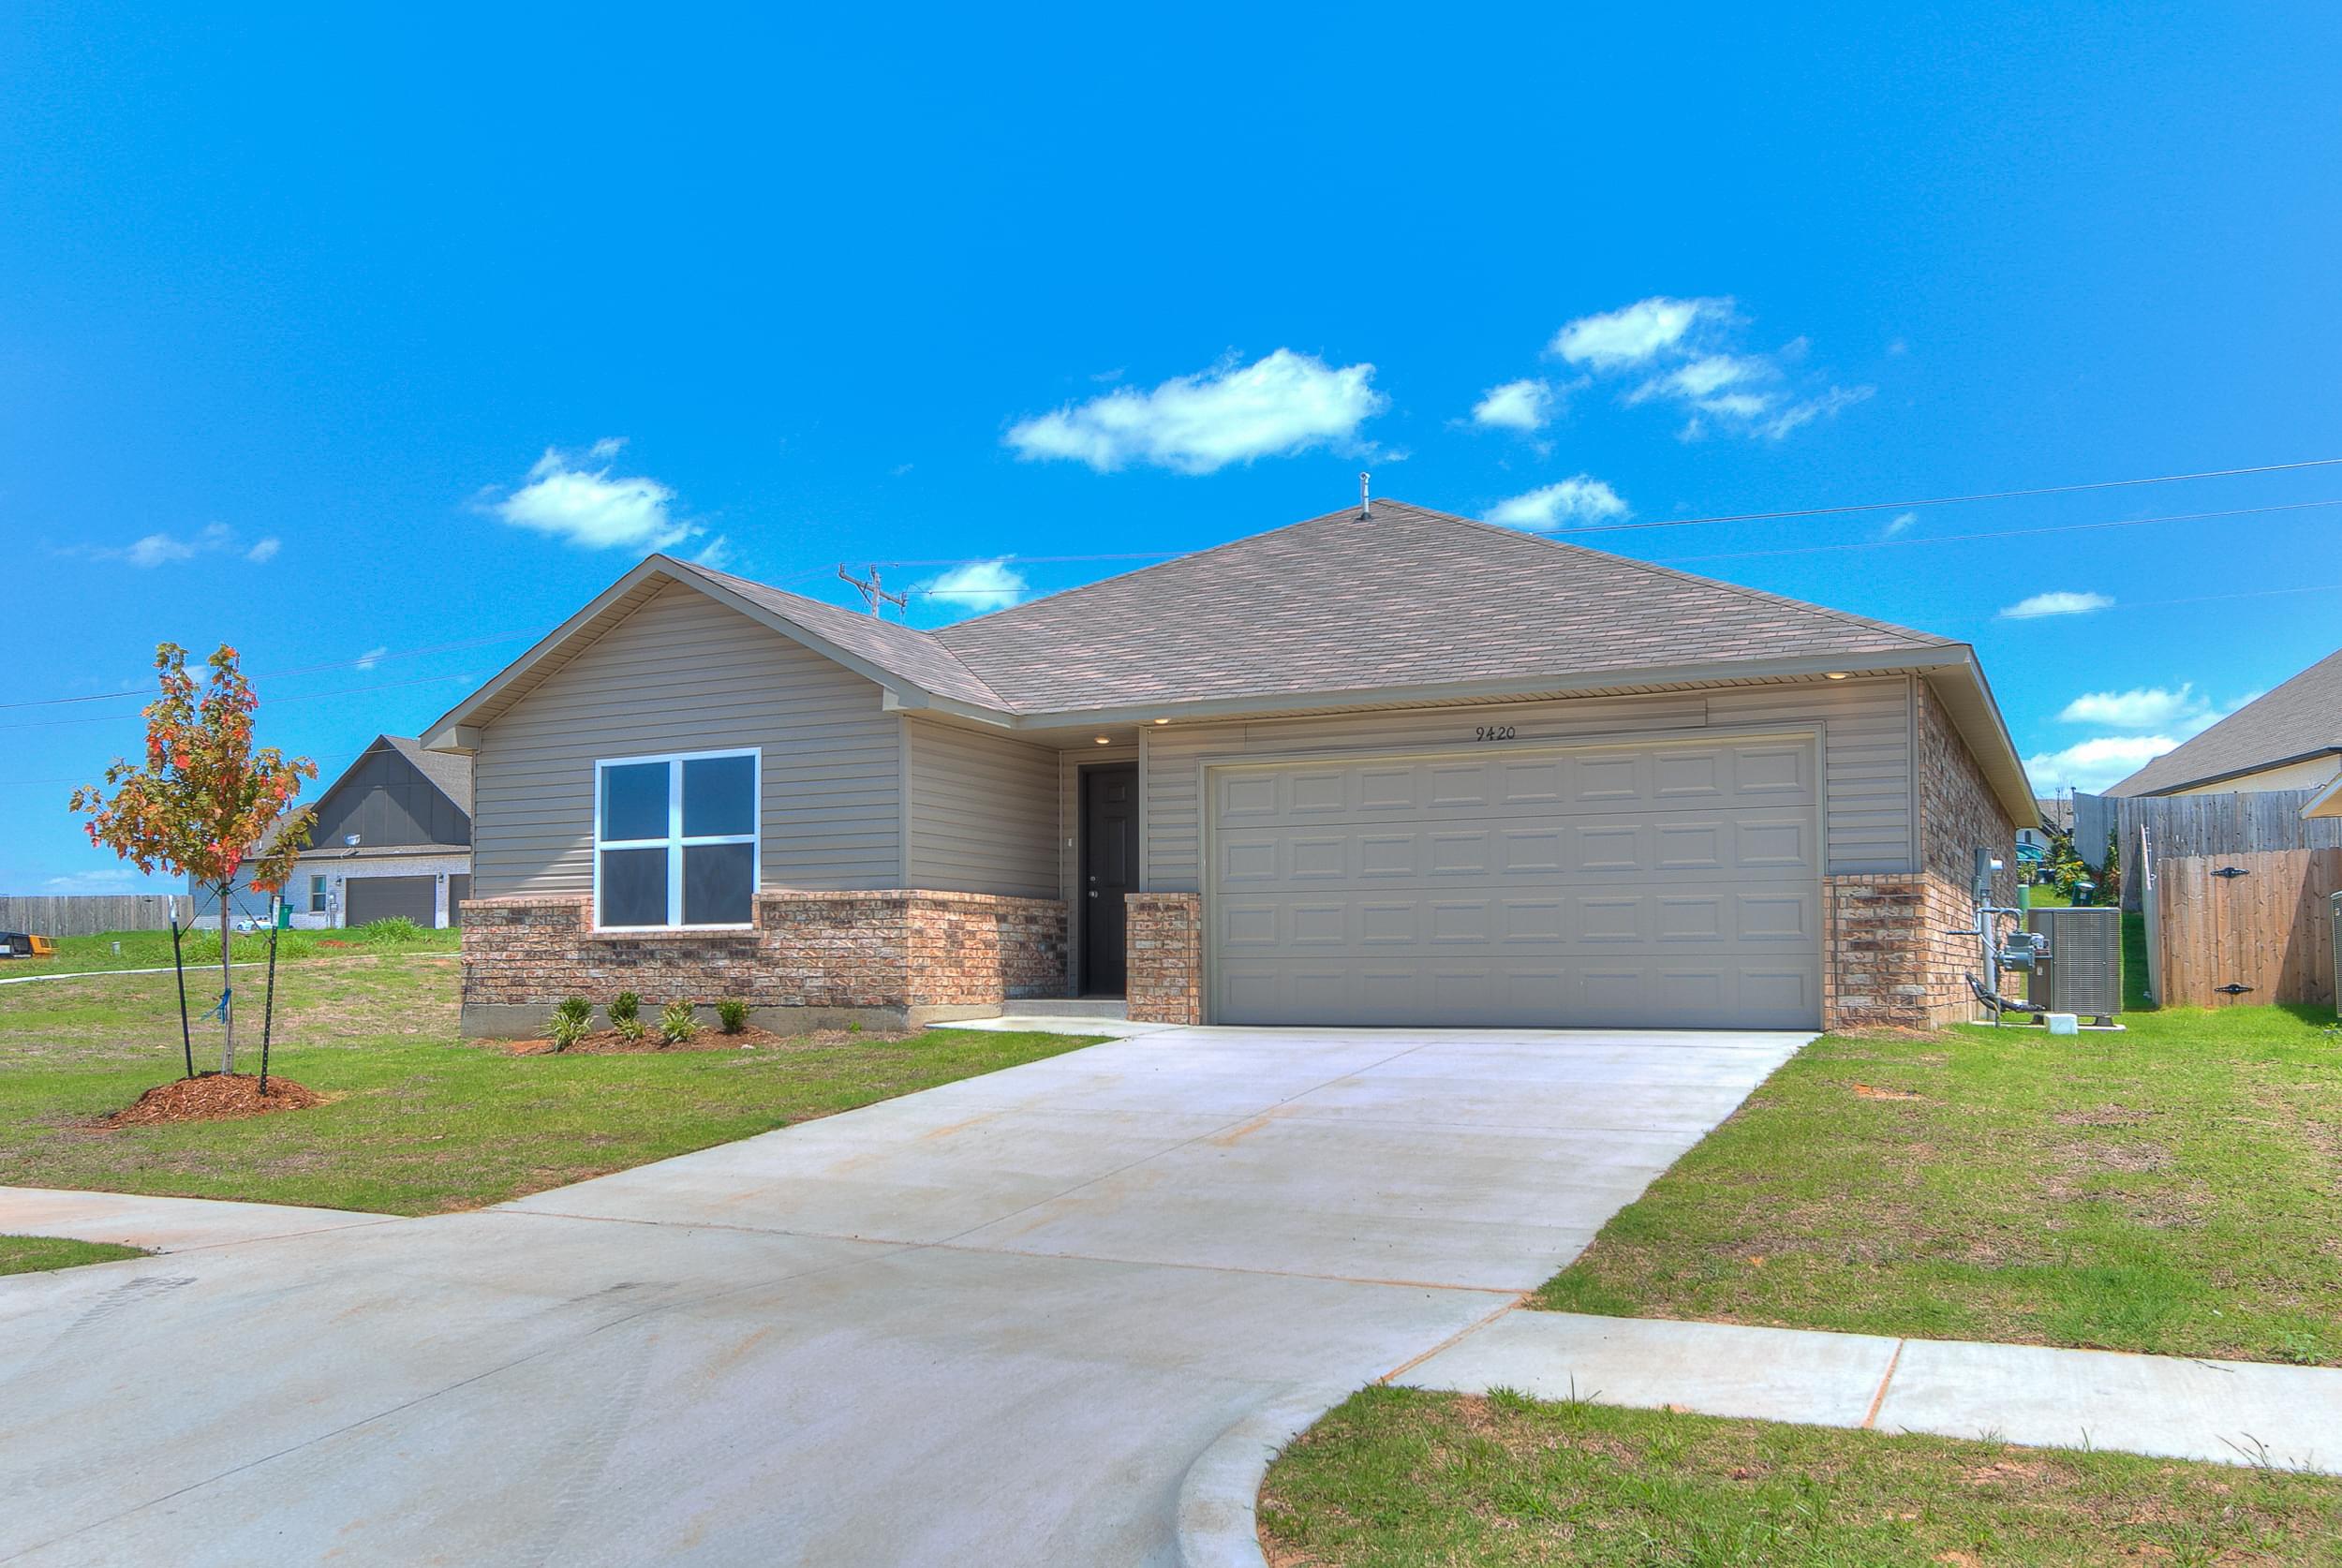 New homes for sale in , OK